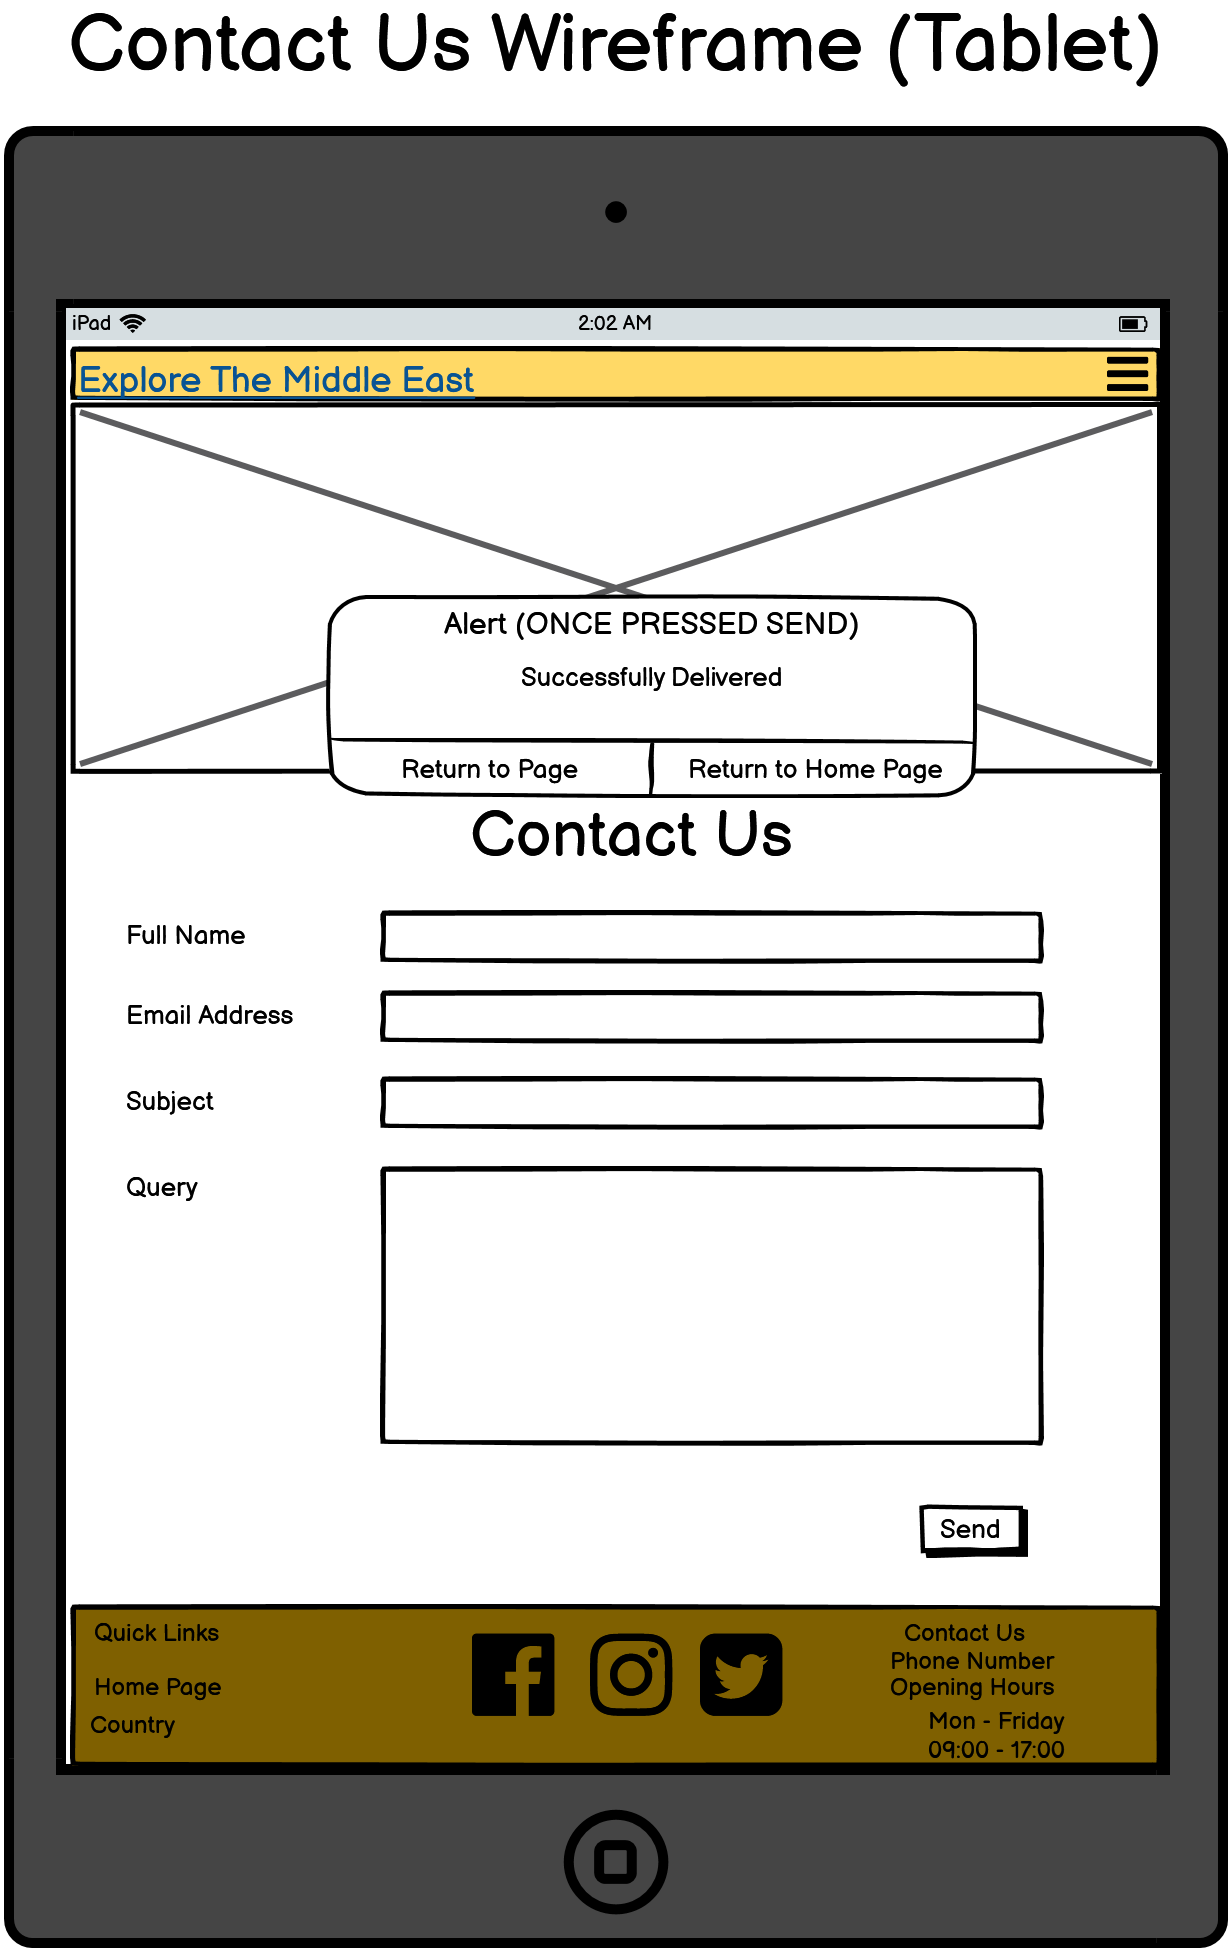 contact-wireframe-tablet.png